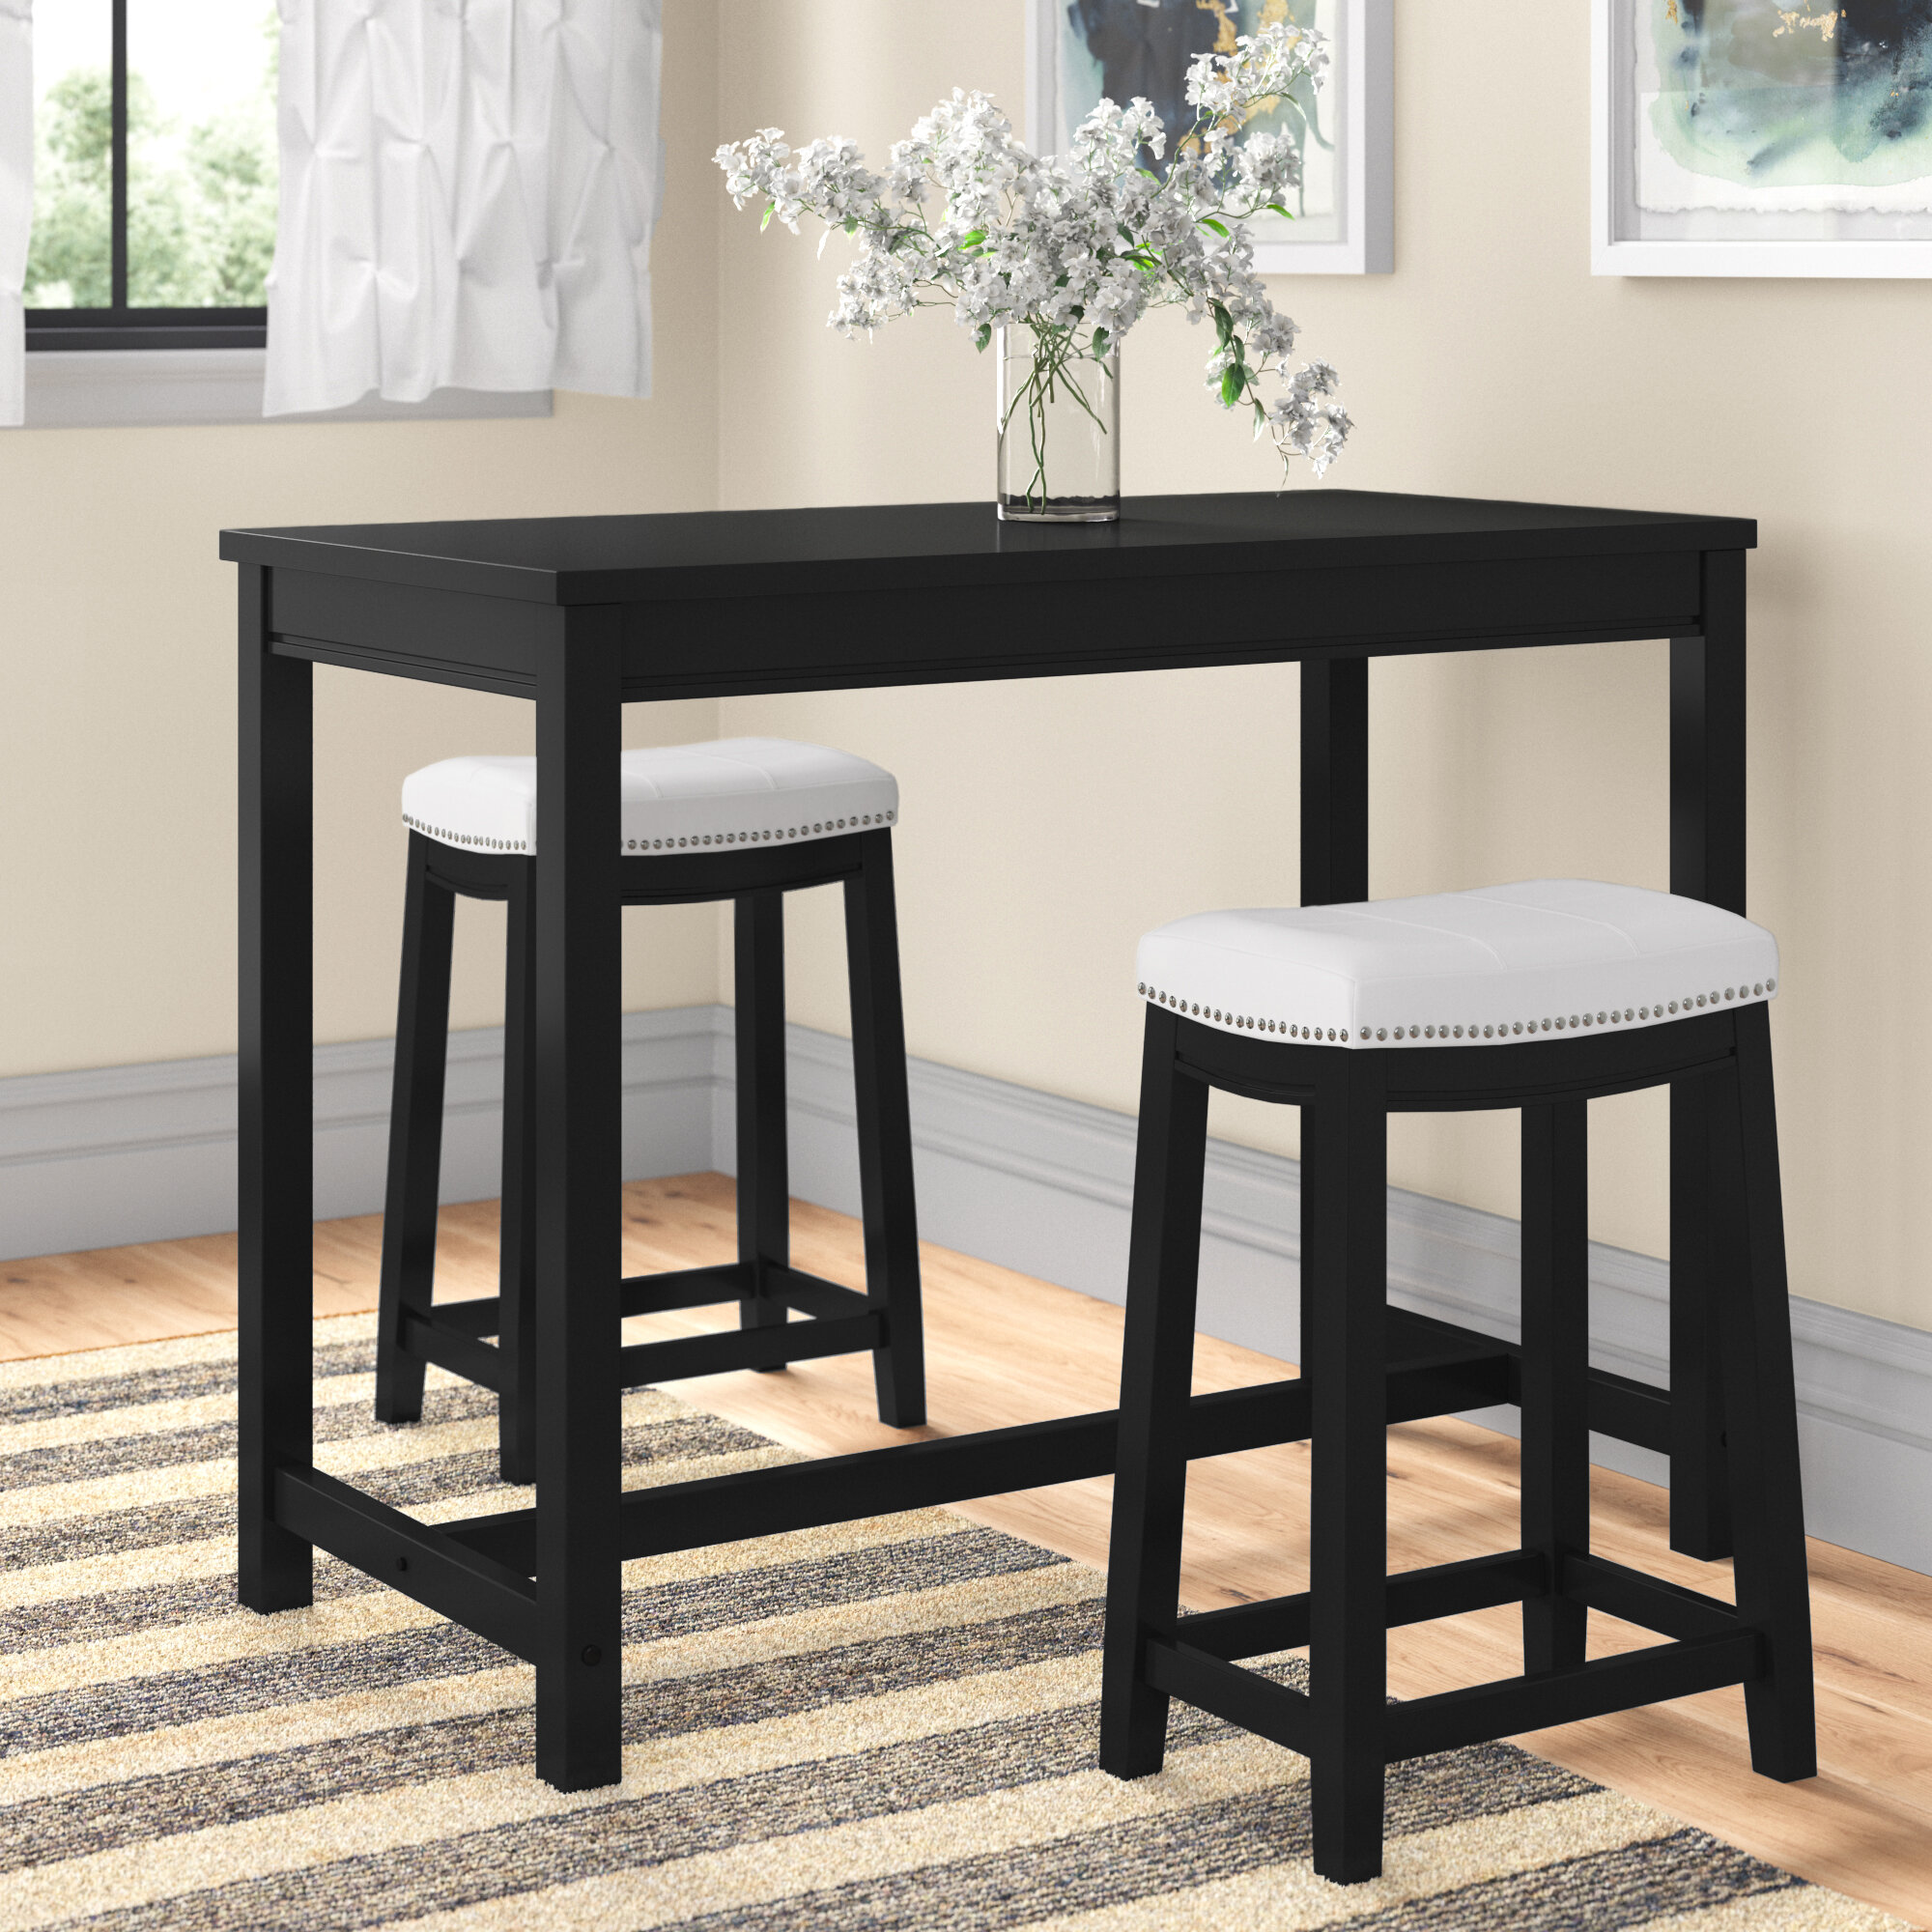 Arlyce 3 - Piece Counter Height Dining Set